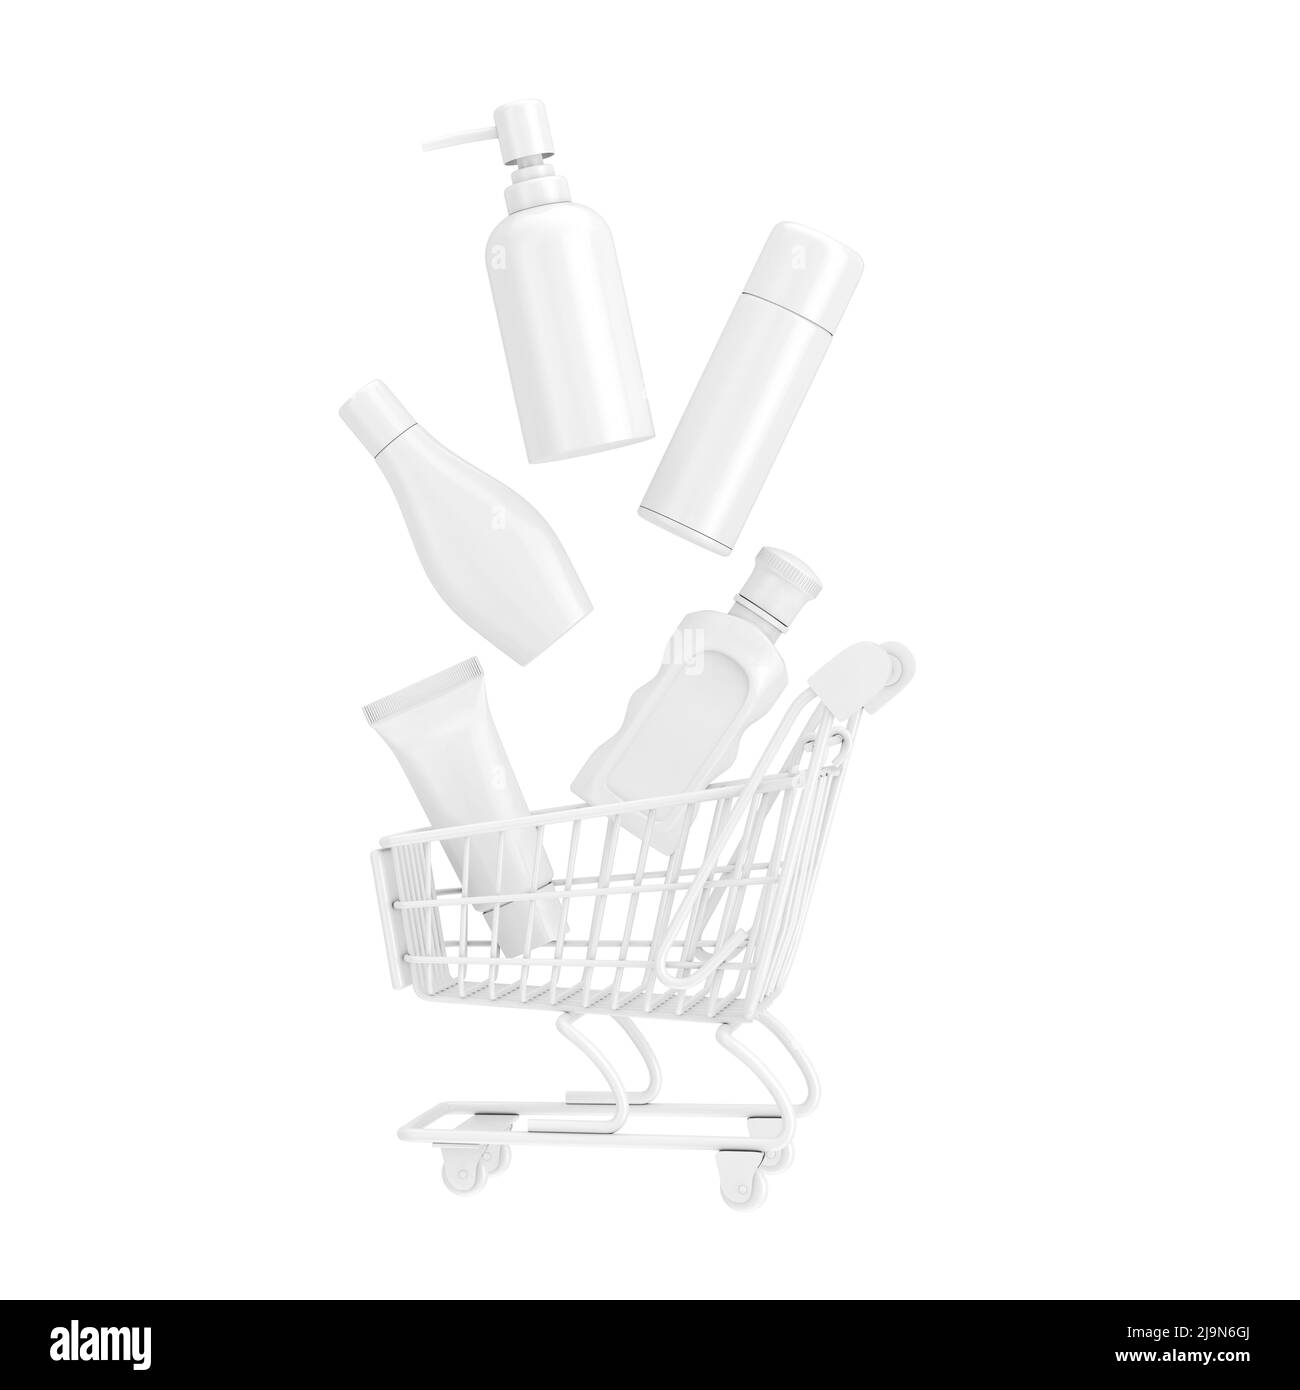 Many White Beauty Fashion Cosmetic Makeup Lotion Bottles Product with Skin Care and Healthcare Concept Falling in Shopping Cart in Clay Style on a whi Stock Photo